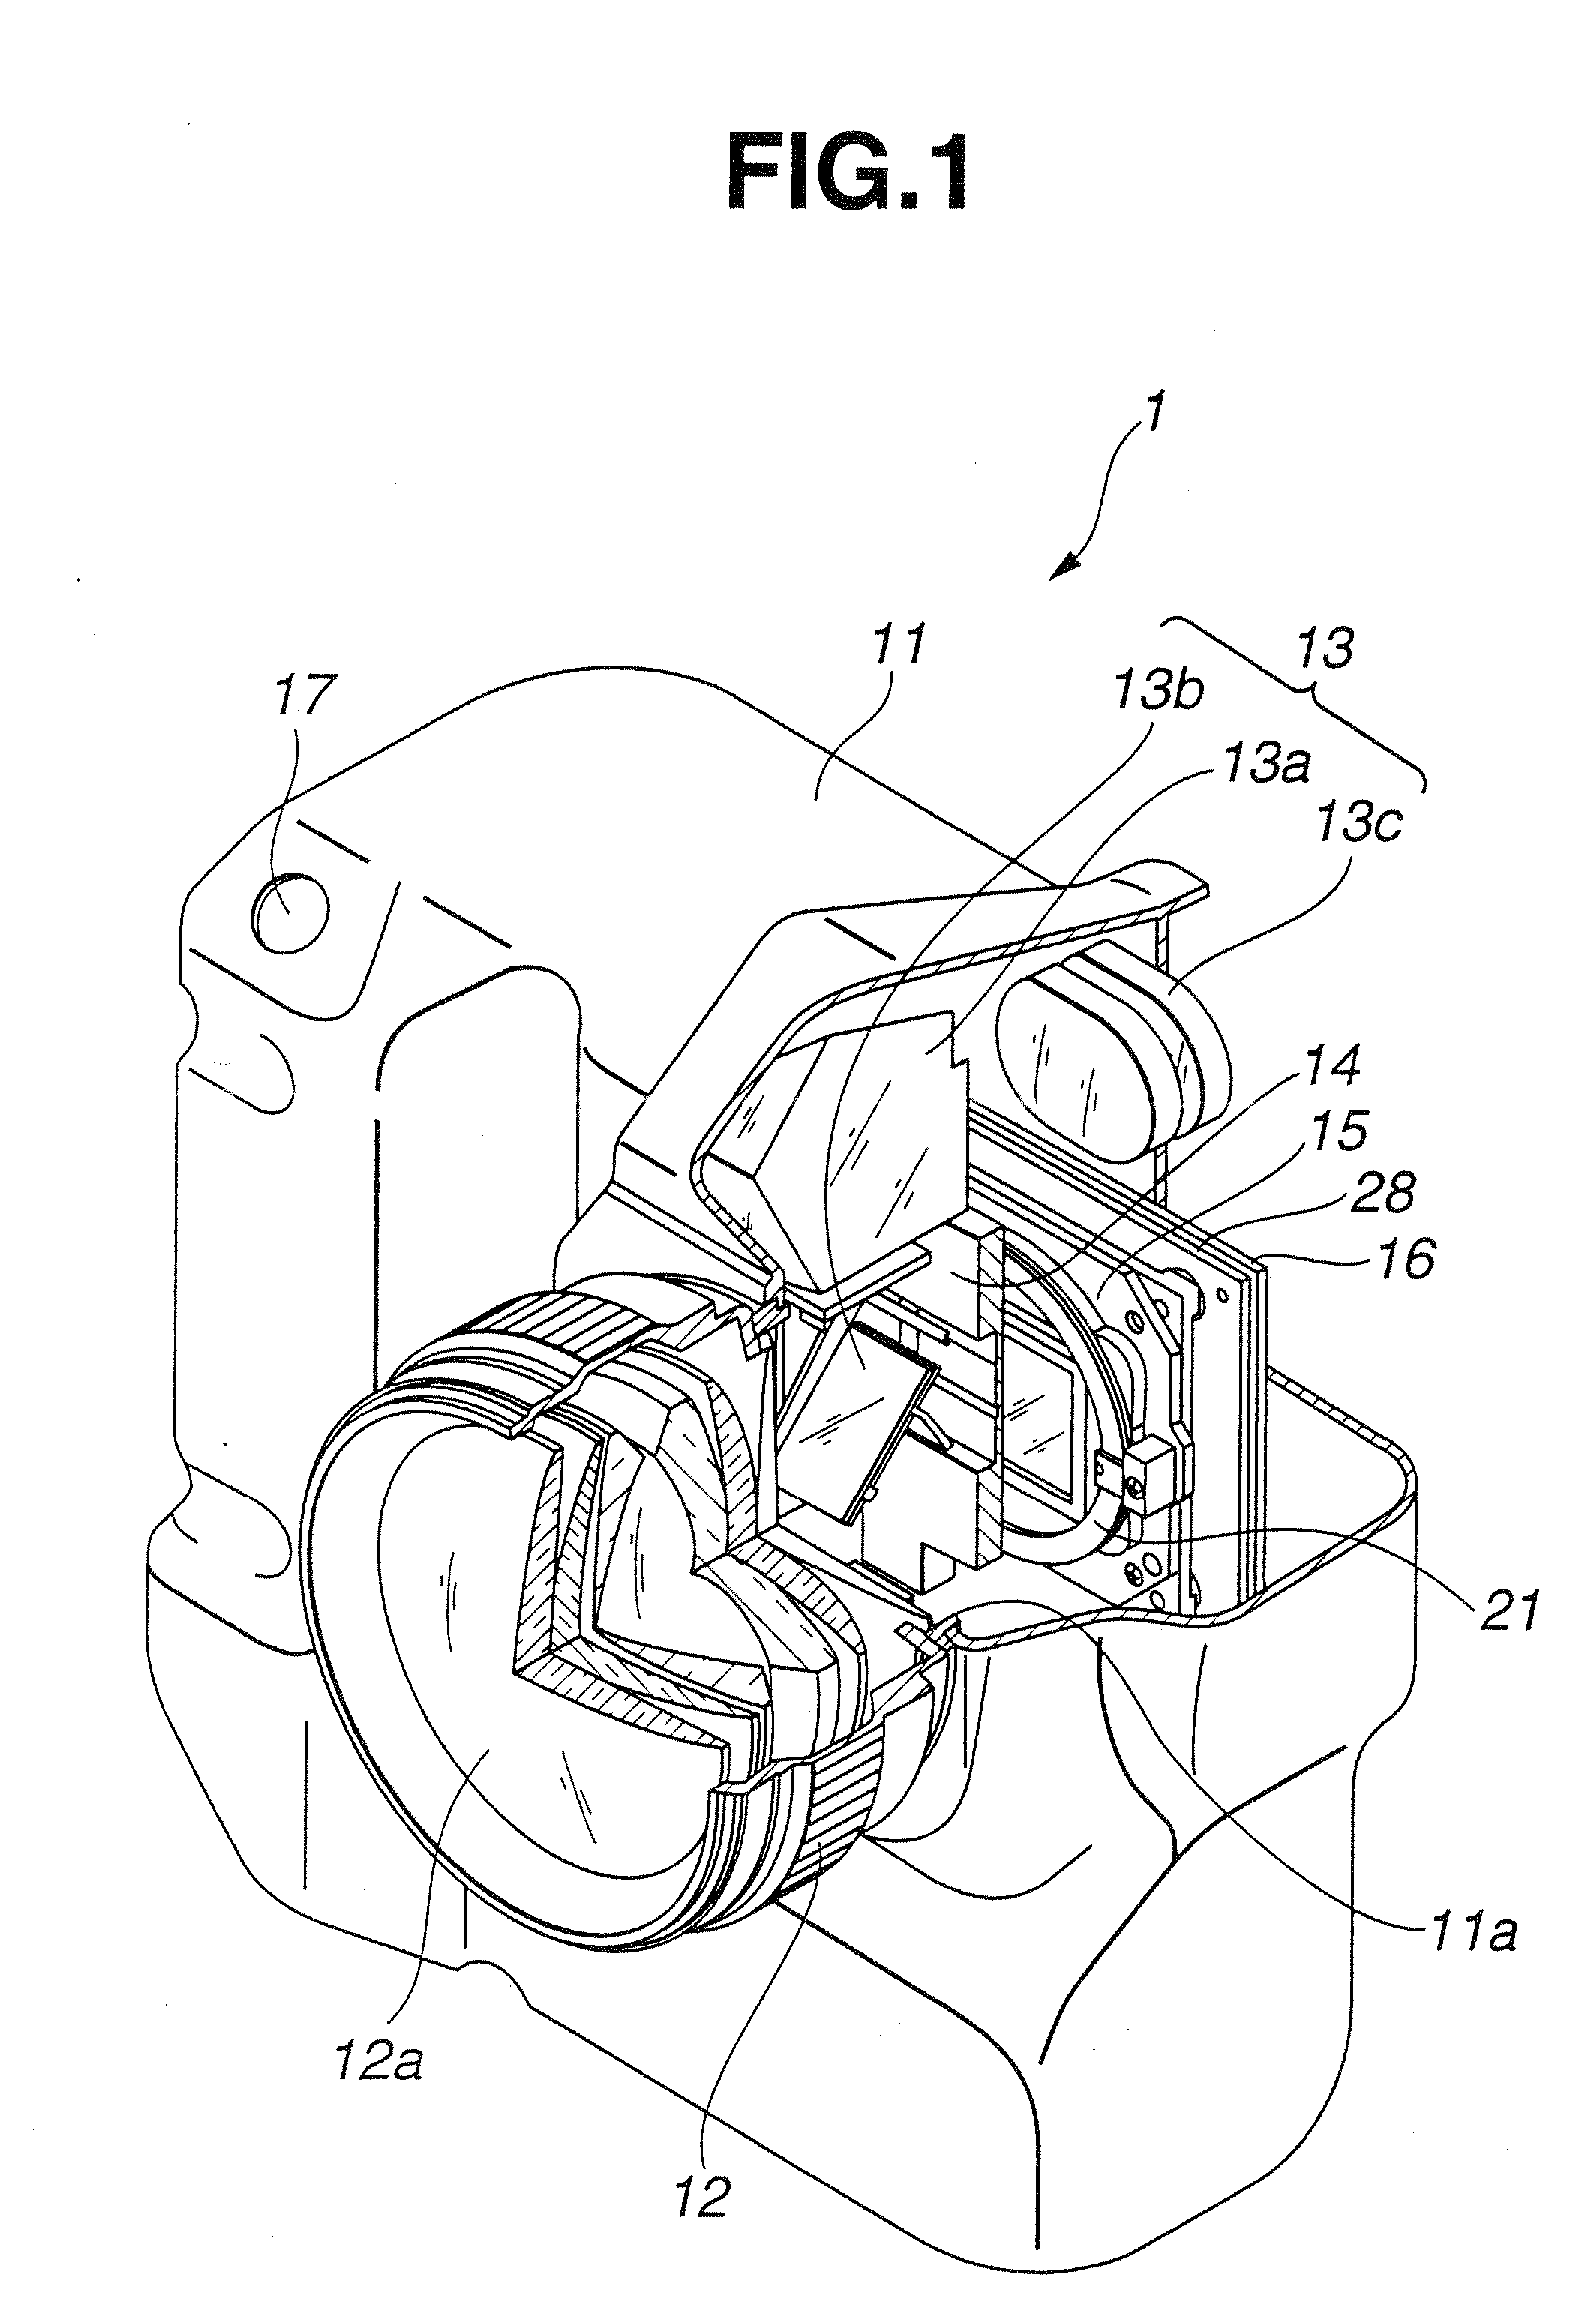 Camera and image pick-up device unit used therefor having a sealing structure between a dust-proofing member and an image pick-up device